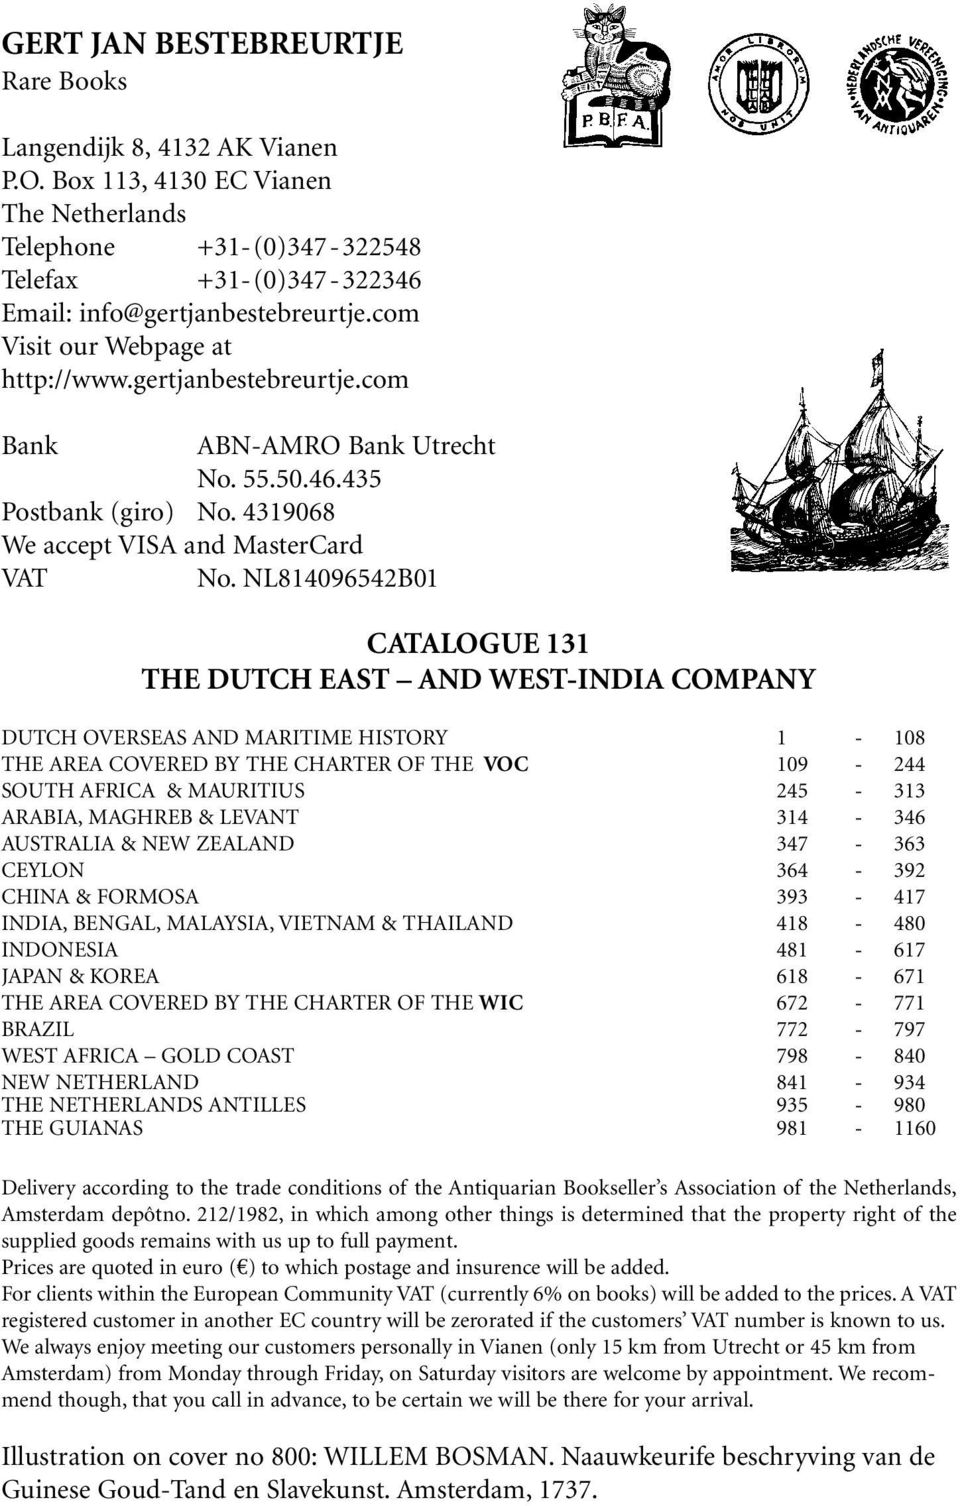 NL814096542B01 CATALOGUE 131 THE DUTCH EAST AND WEST-INDIA COMPANY DUTCH OVERSEAS AND MARITIME HISTORY 1-108 THE AREA COVERED BY THE CHARTER OF THE VOC 109-244 SOUTH AFRICA & MAURITIUS 245-313